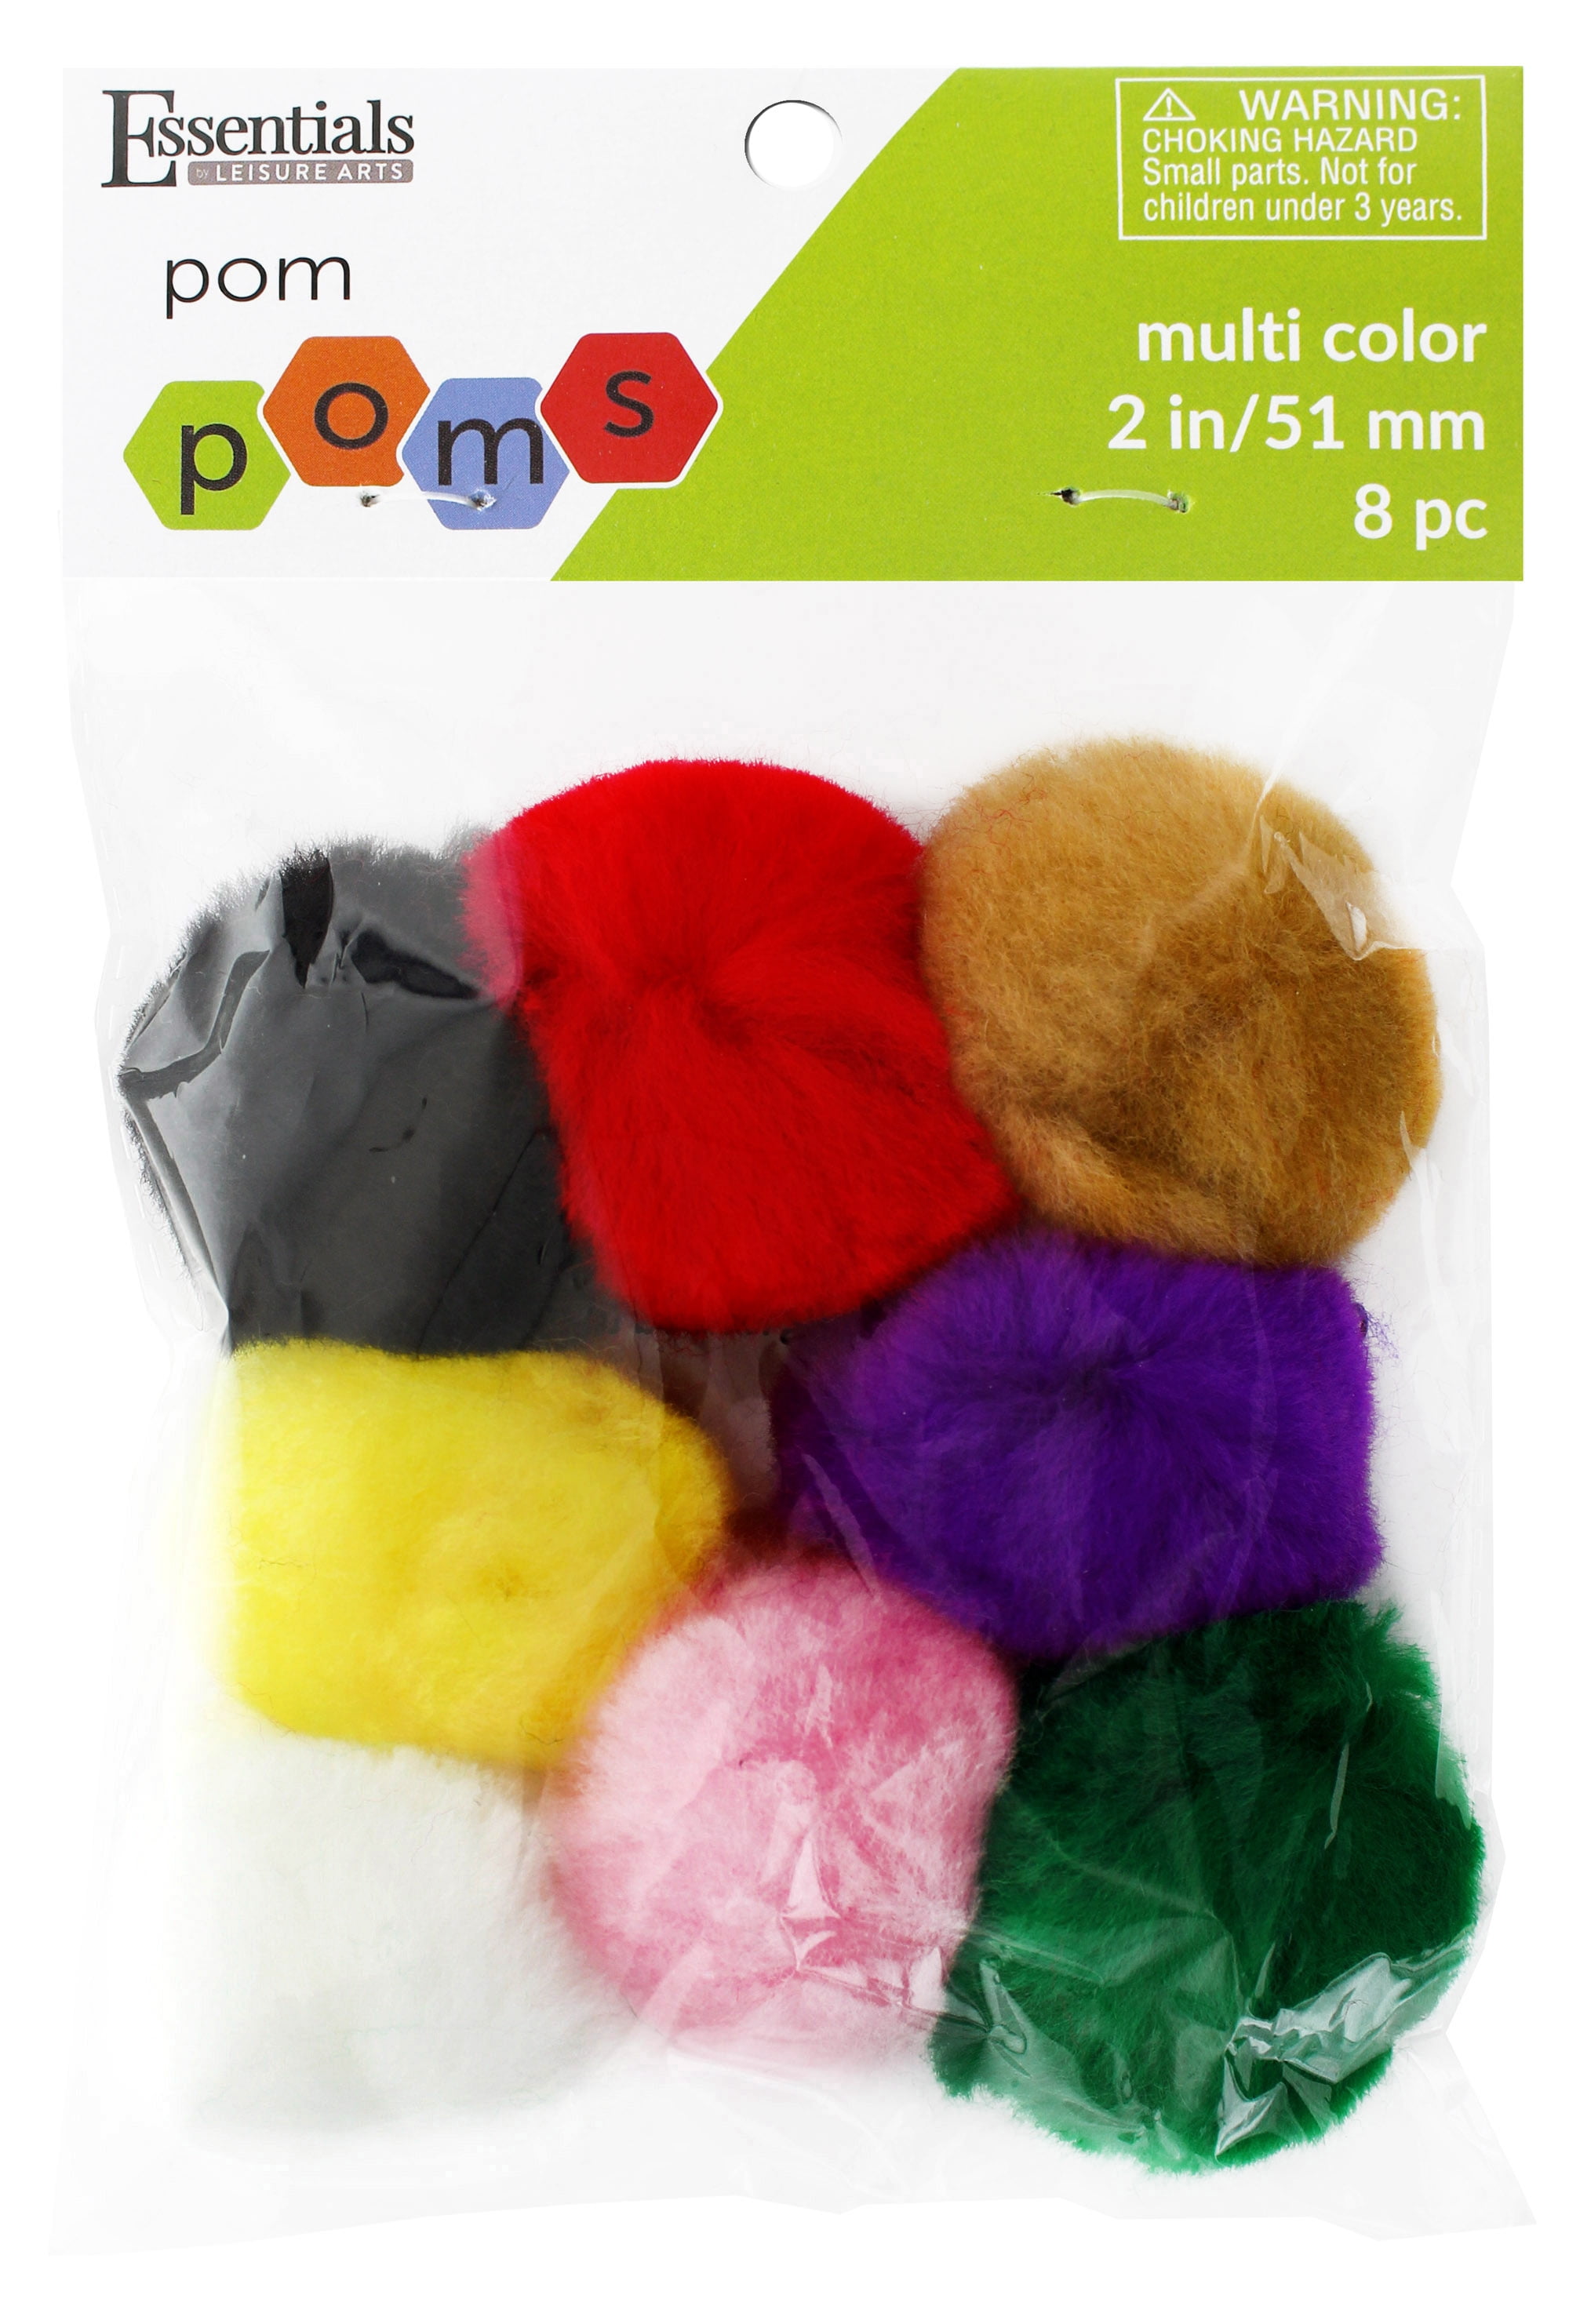 Essentials by Leisure Arts Pom Poms - Red -10mm - 100 piece pom poms arts  and crafts - colored pompoms for crafts - craft pom poms - puff balls for  crafts